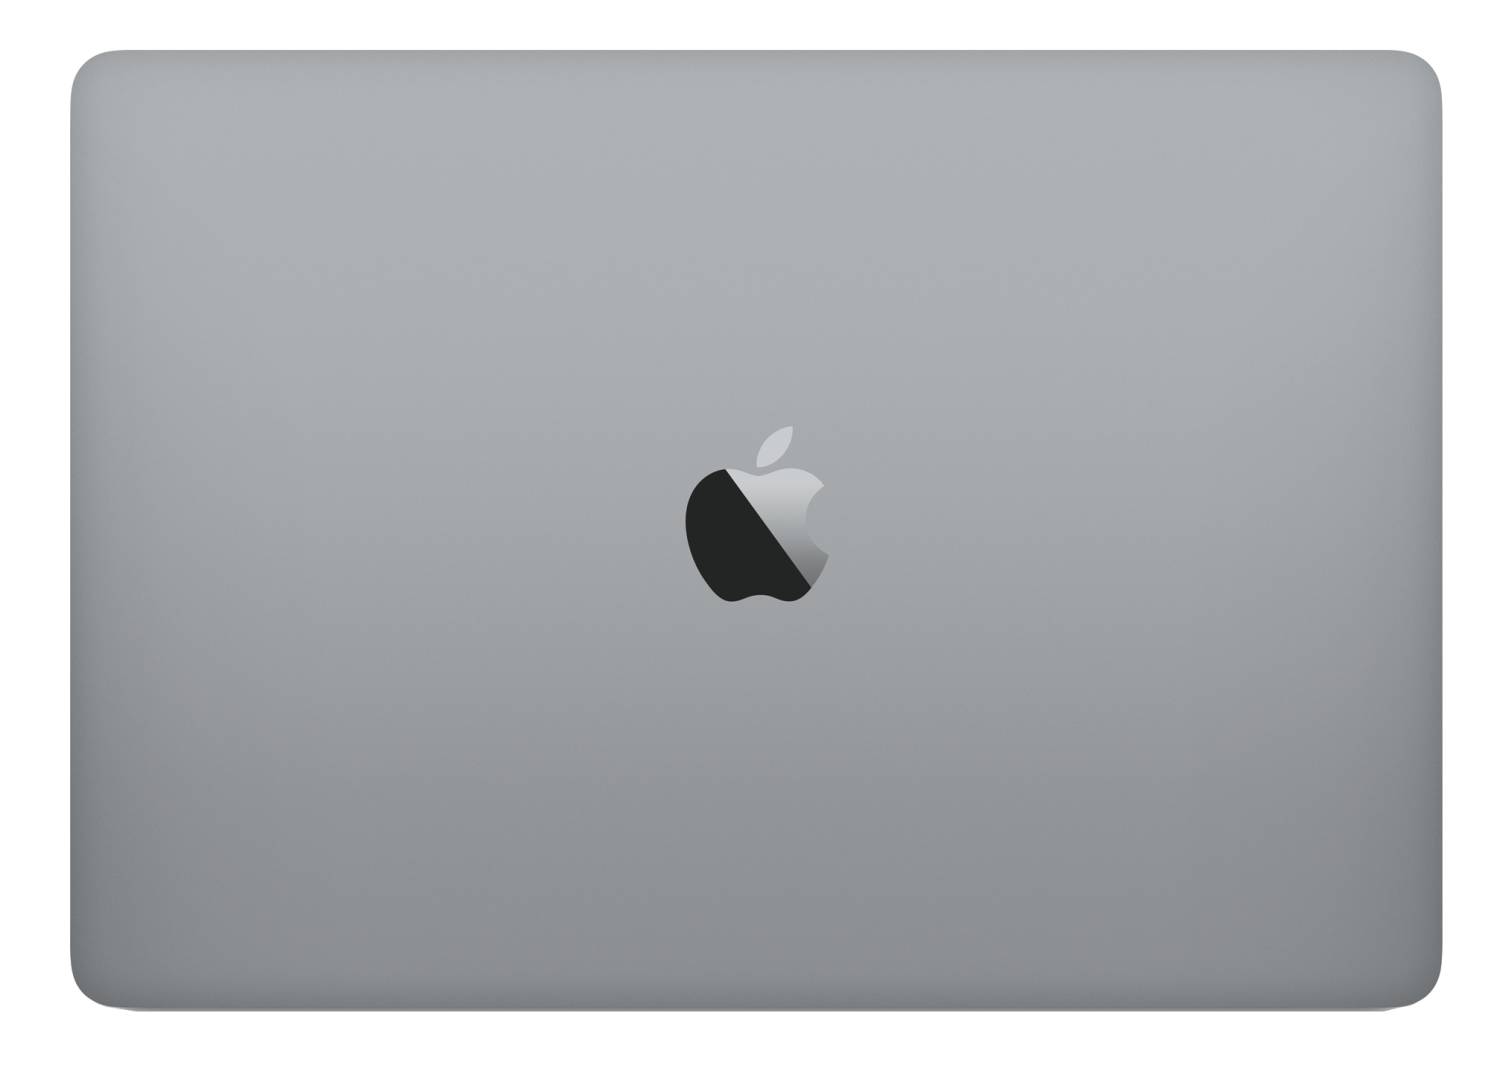 Apple A Grade Macbook Pro 15.4-inch (Retina DG, Space Gray, Touch Bar) 2.9Ghz Quad Core i7 (Late 2016) MLH42LL/A 512GB SSD 16GB Ram 2880x1800 Res Parrallels Dual Boot MacOS/Win 10 Pro Power Adapter - image 3 of 3